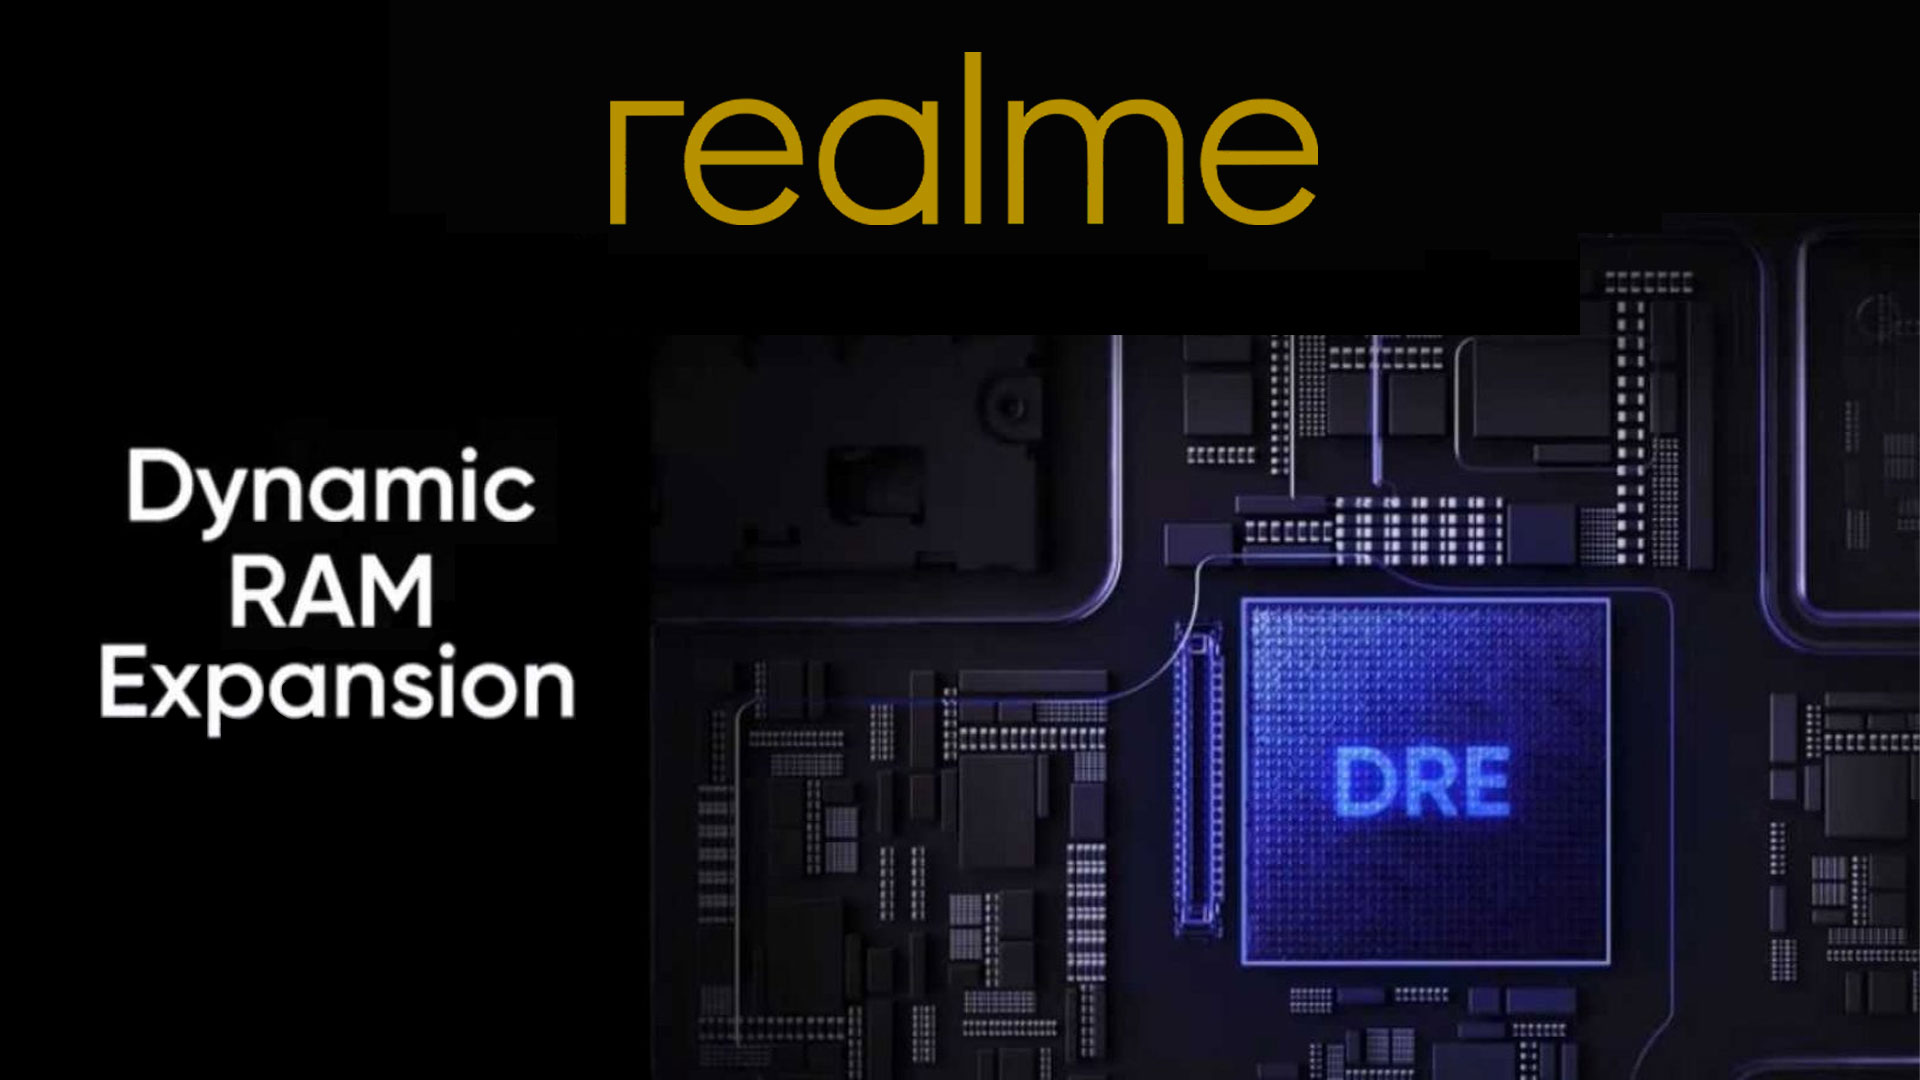 33 Realme smartphones will get RAM expansion feature